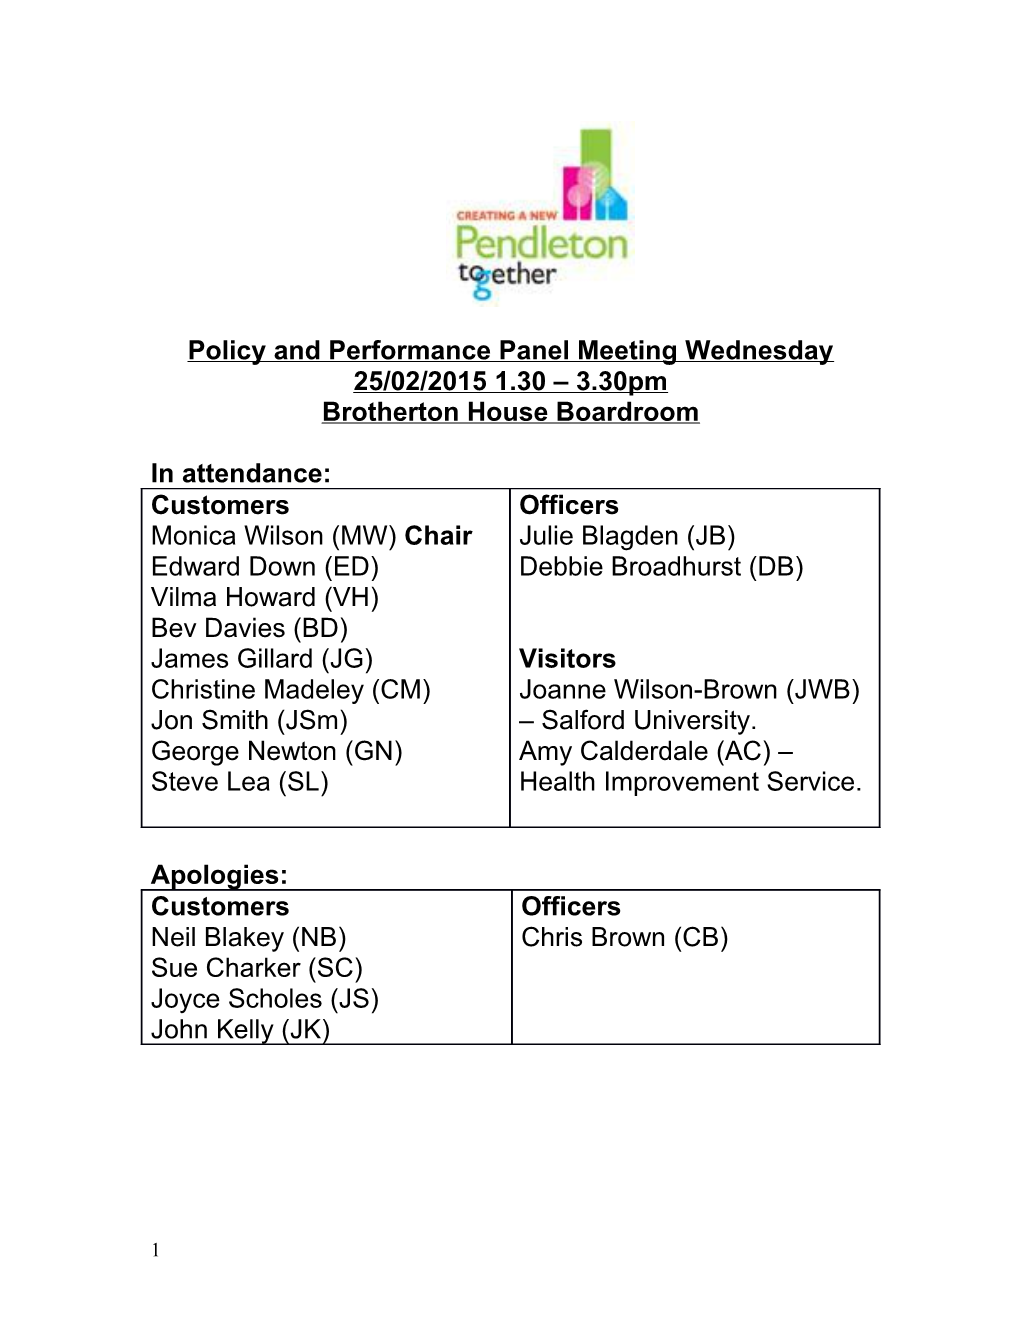 Policy and Performance Panel Meeting Wednesday 25/02/2015 1.30 3.30Pm